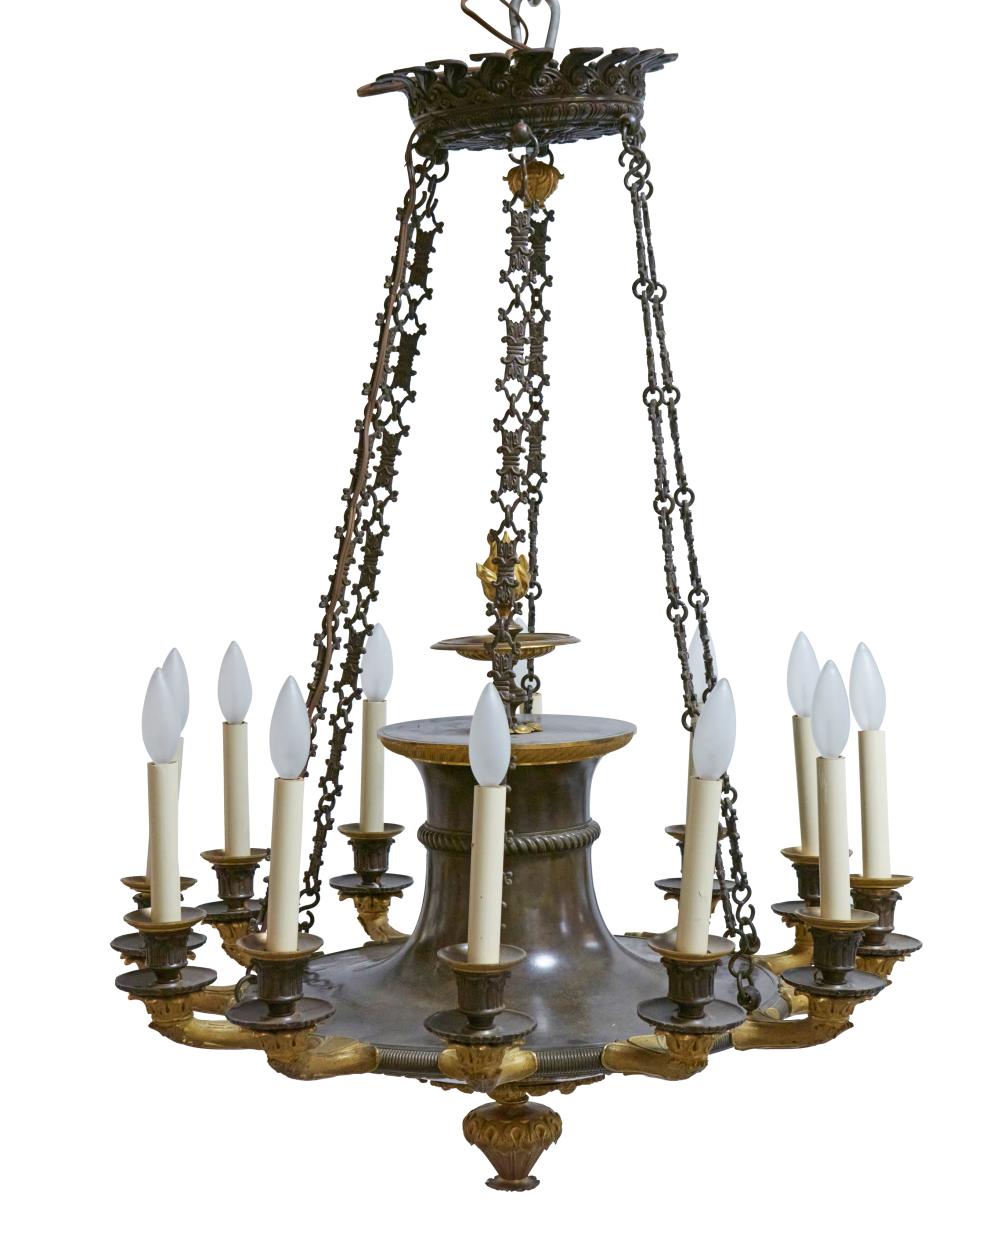 A FRENCH LOUIS PHILIPPE CHANDELIERA